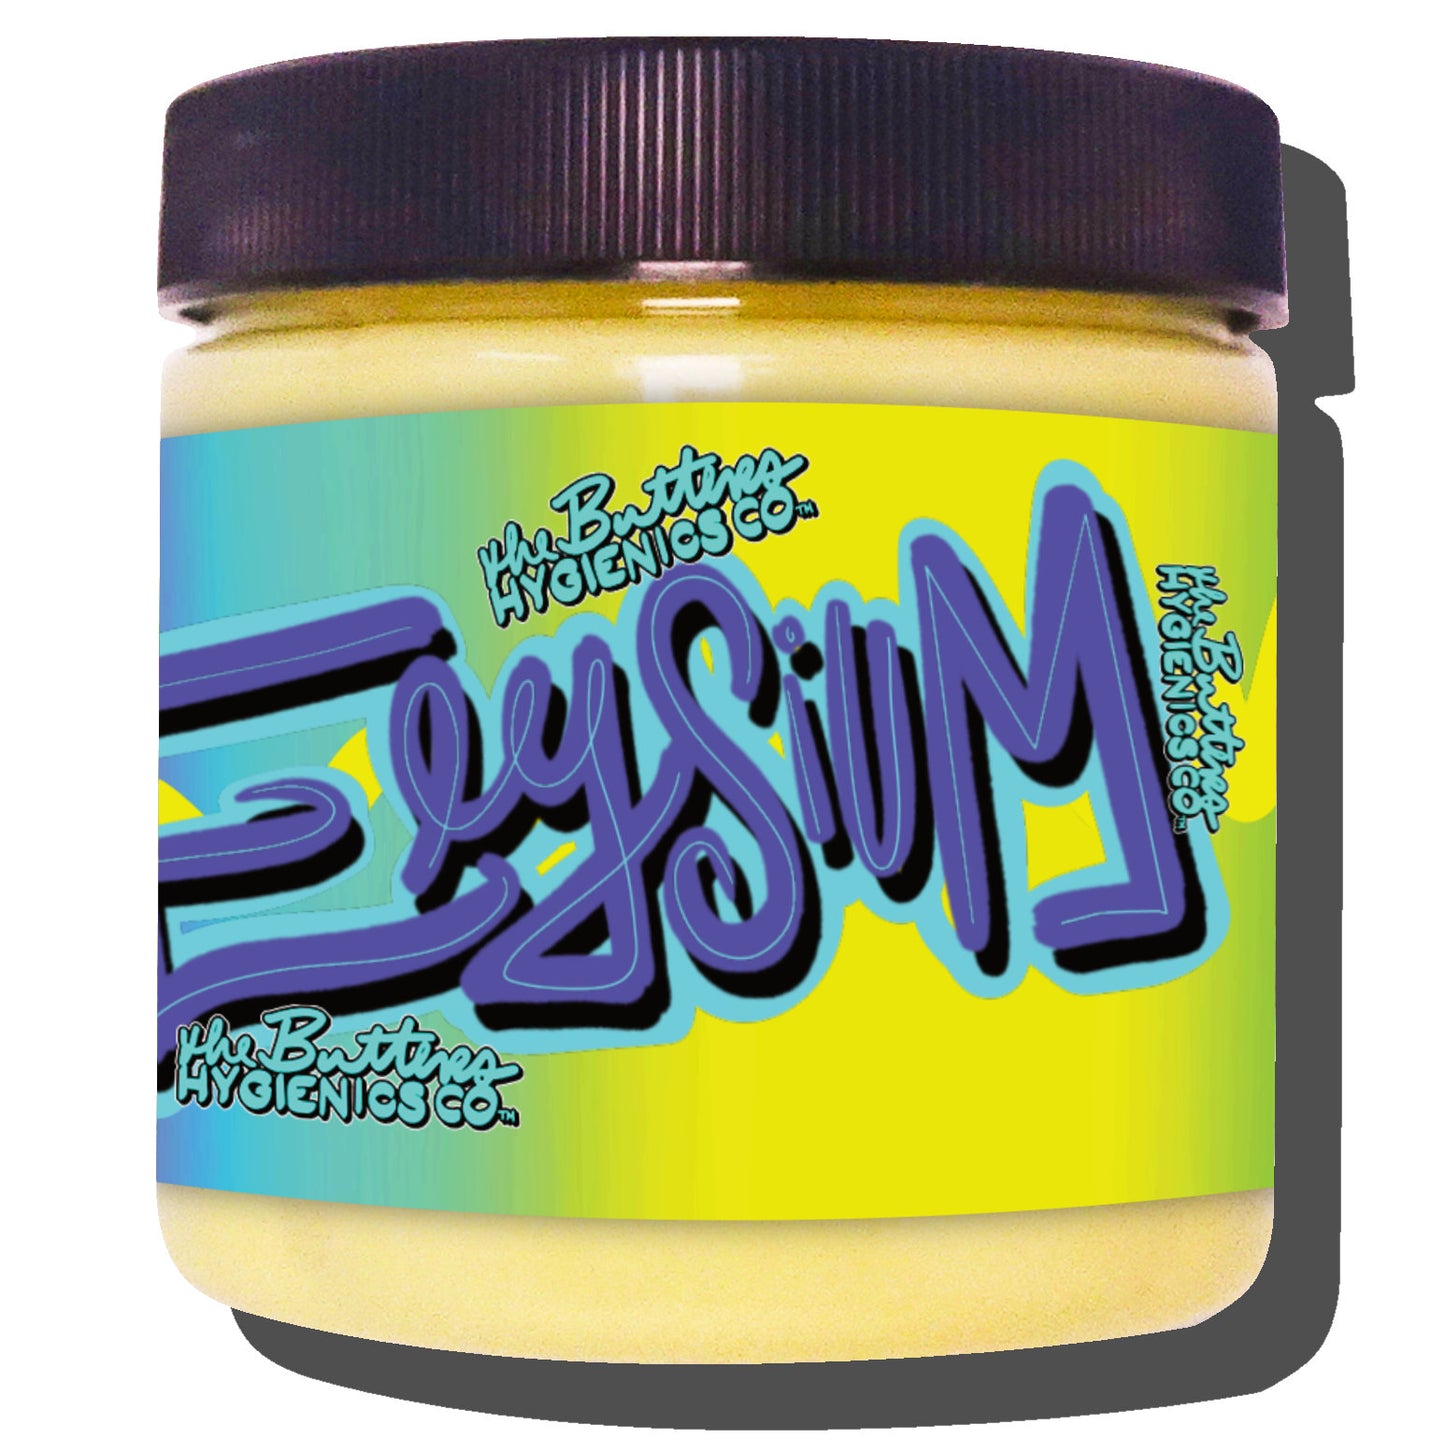 Spiced Blossom Elysium | Cocoa Butter Body Moisturizer *LIMITED EDITION*